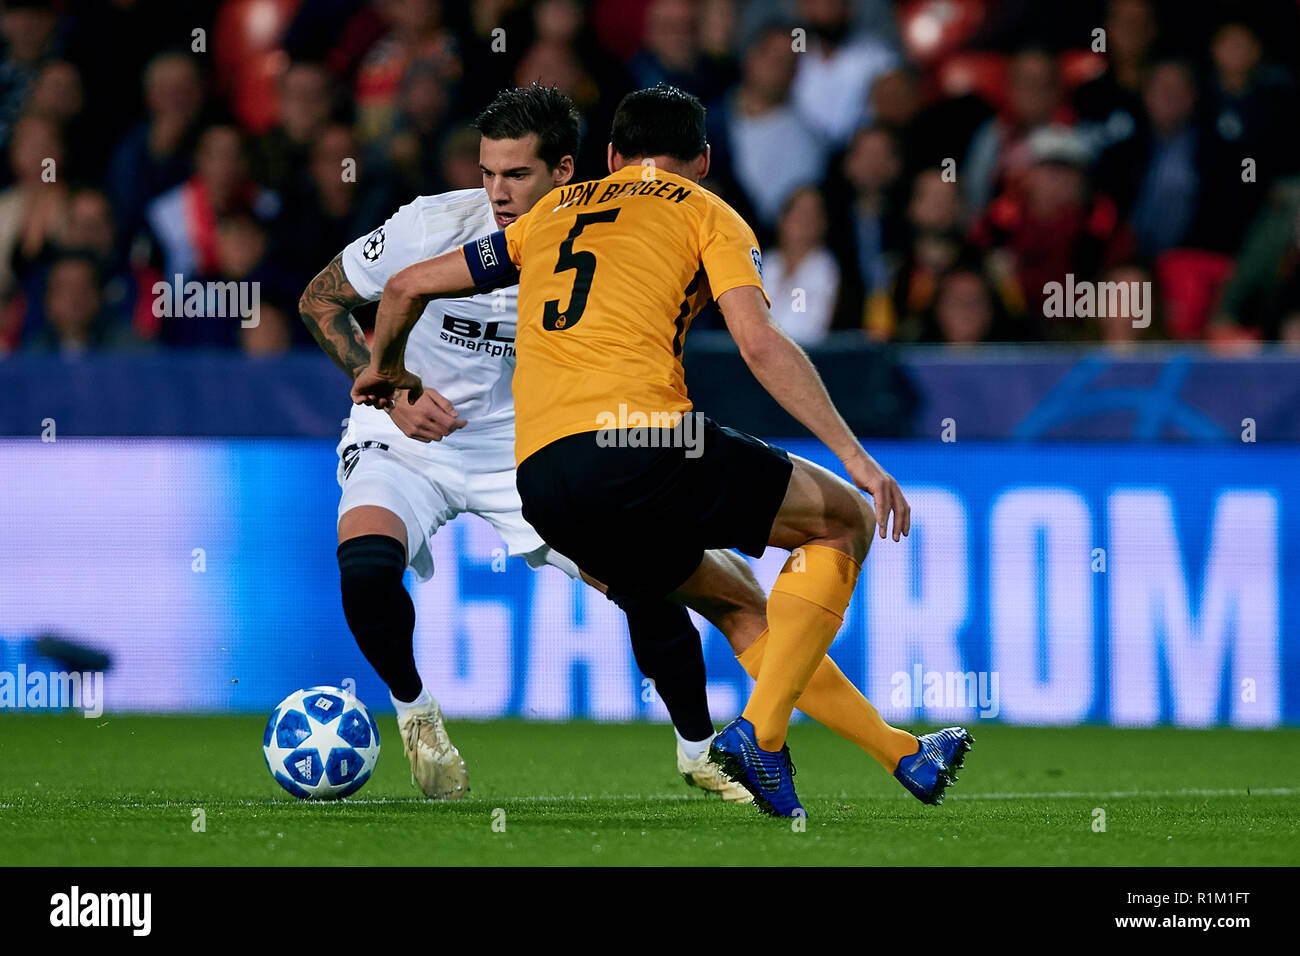 VALENCIA, SPAIN - NOVEMBER 07: Santi Mina of Valencia CF competes for the ball with Steve von Bergen of BSC Young Boys during the Group H match of the UEFA Champions League between Valencia and BSC Young Boys at Estadio Mestalla on November 7, 2018 in Valencia, Spain. (David Aliaga/MB Media) Stock Photo